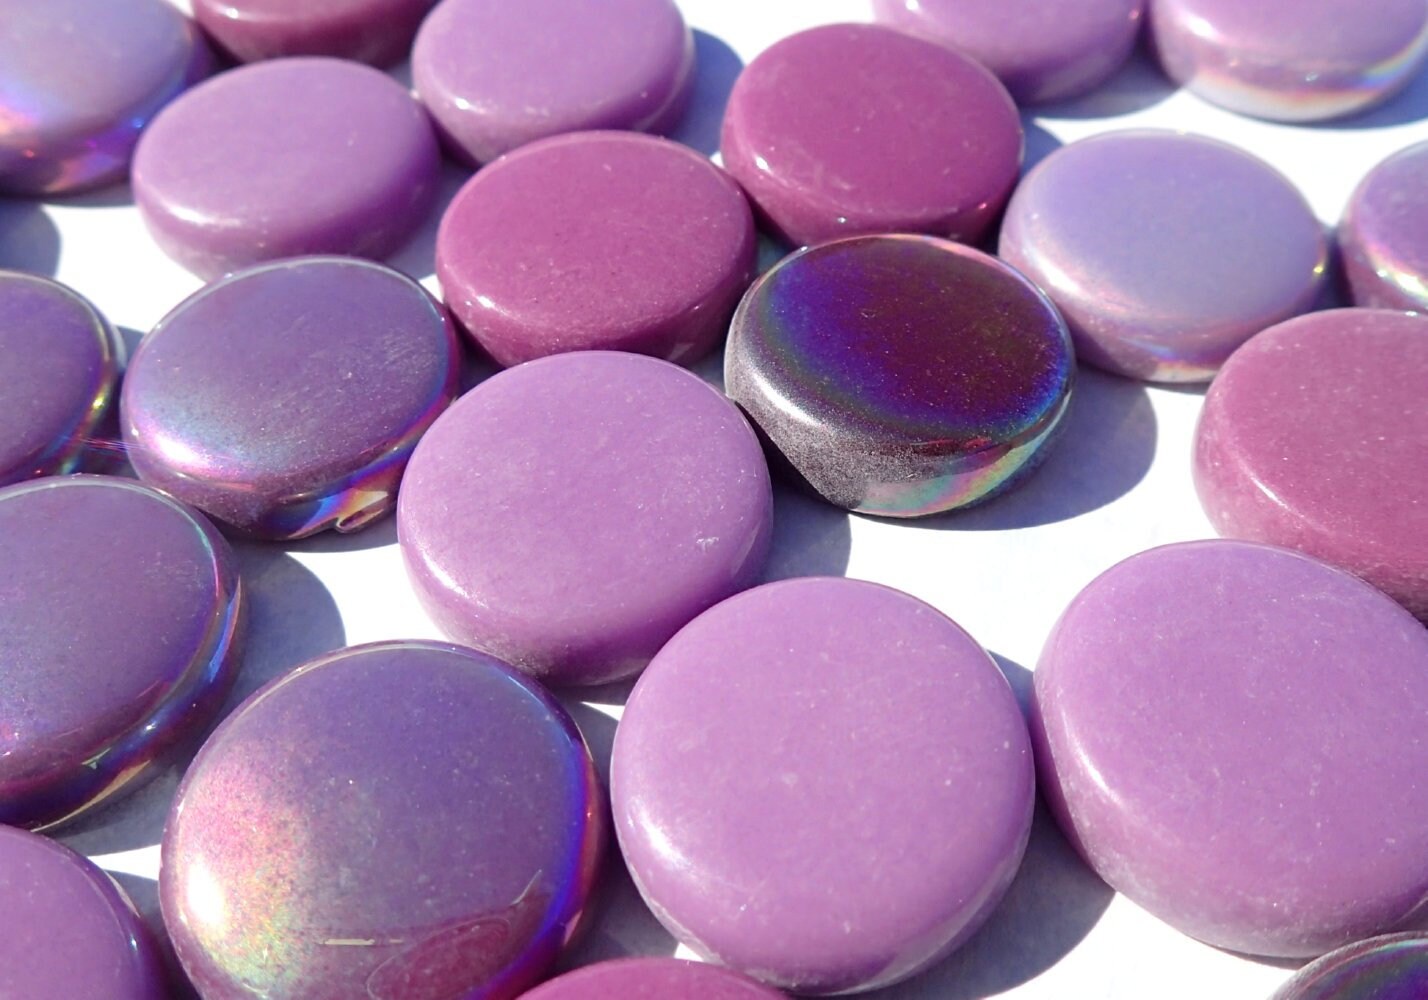 Berry Mix Glass Drops Mosaic Tiles - 100 grams - 20mm Mix of Gloss and Iridescent Glass Gems - Approx 20 Tiles